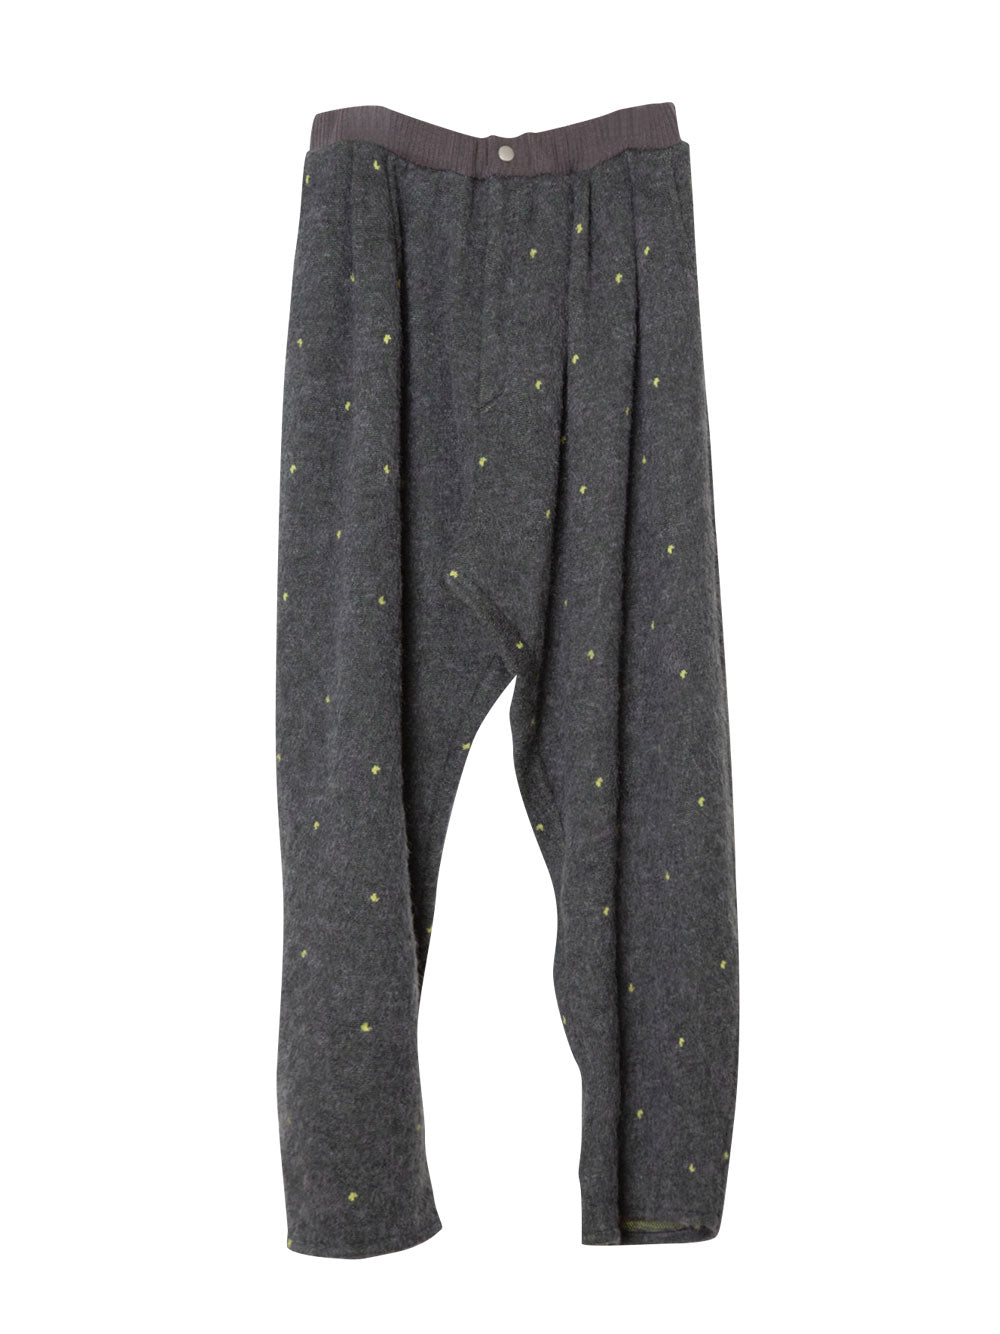 Tiny Fruit Charcoal Trousers